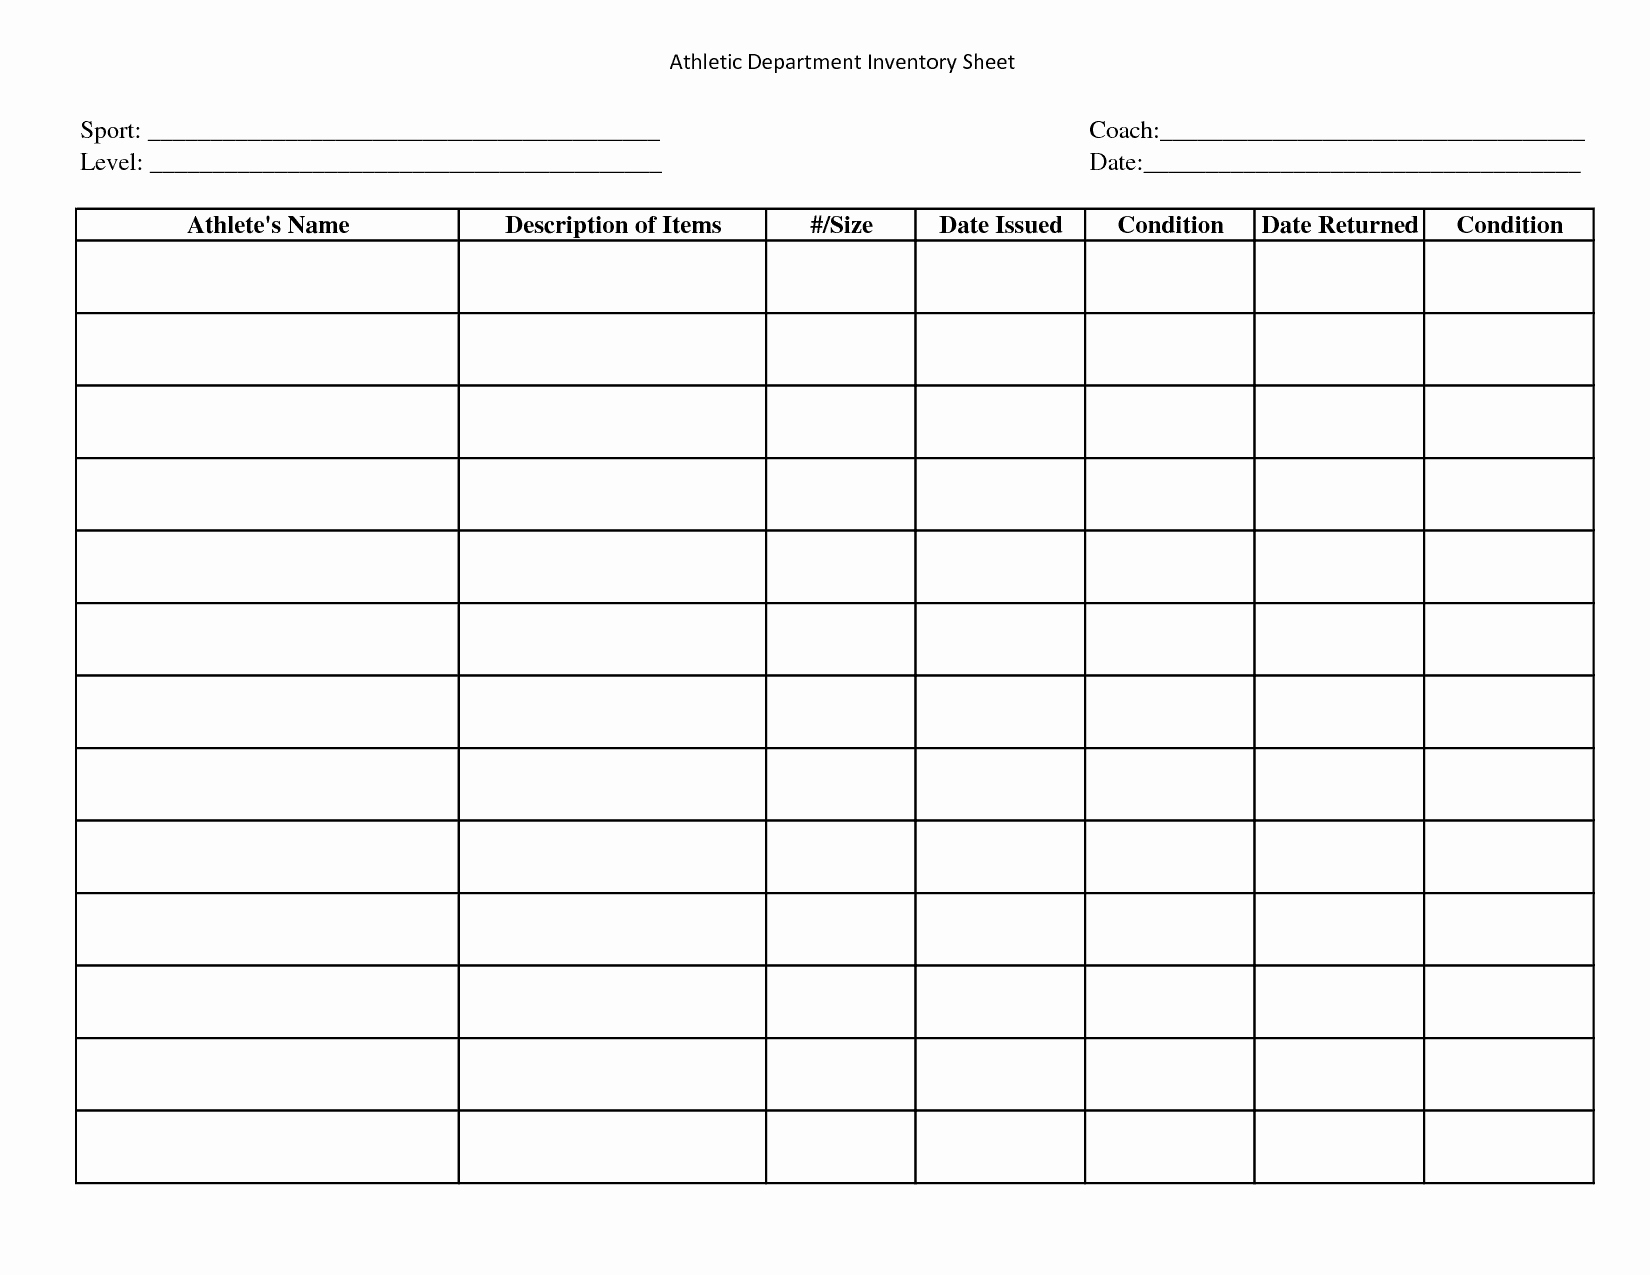 Bakery Costing Spreadsheet Inside Bakery Inventory Sheet New Food Cost Spreadsheet Luxury Example Of